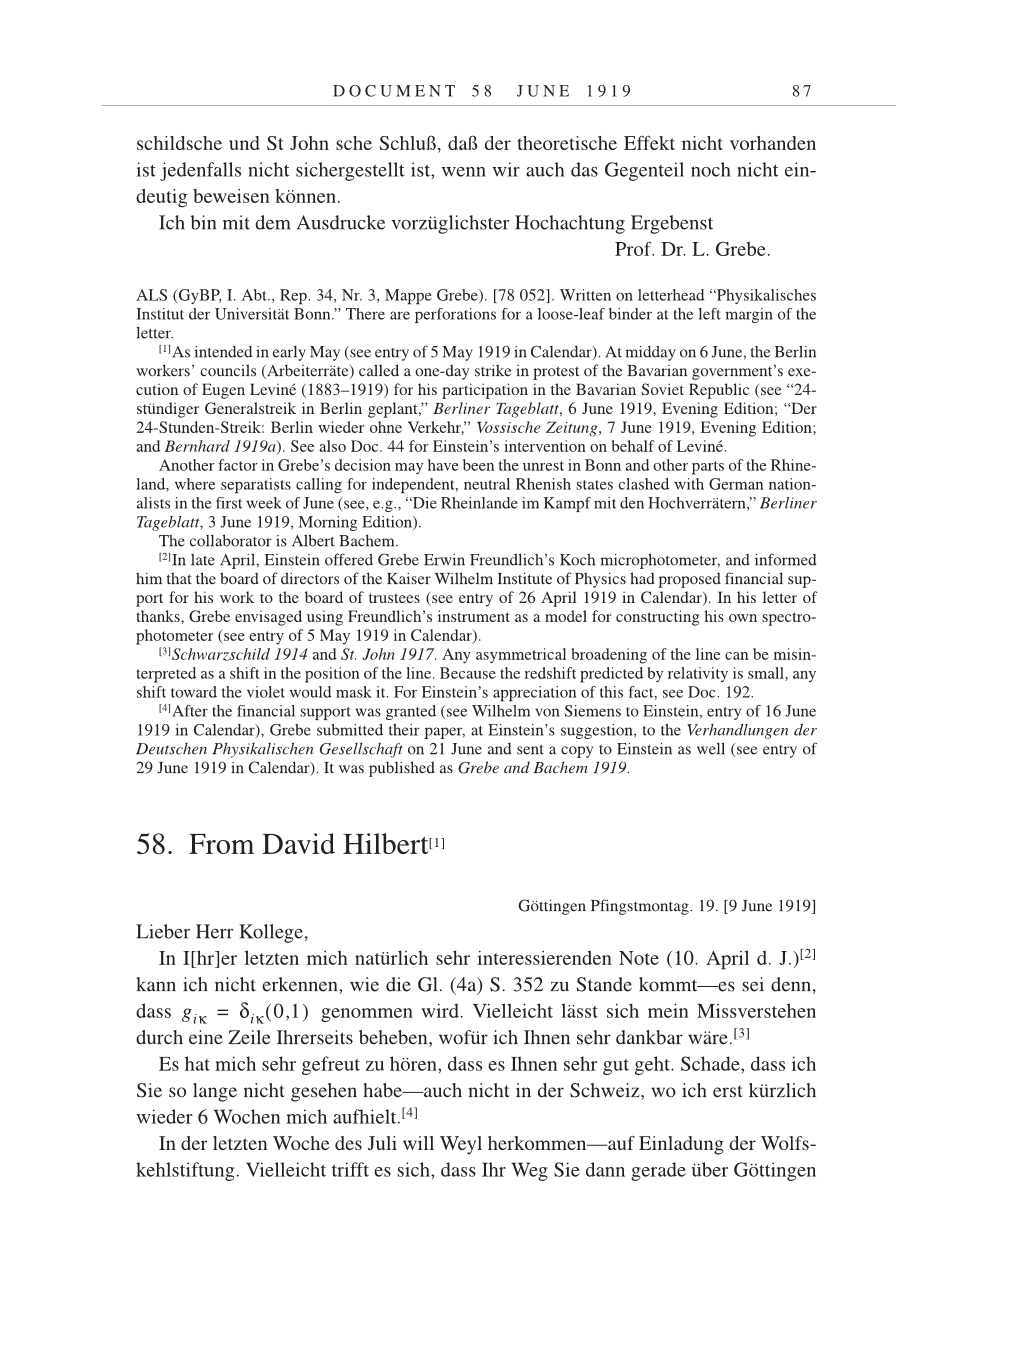 Volume 9: The Berlin Years: Correspondence January 1919-April 1920 page 87